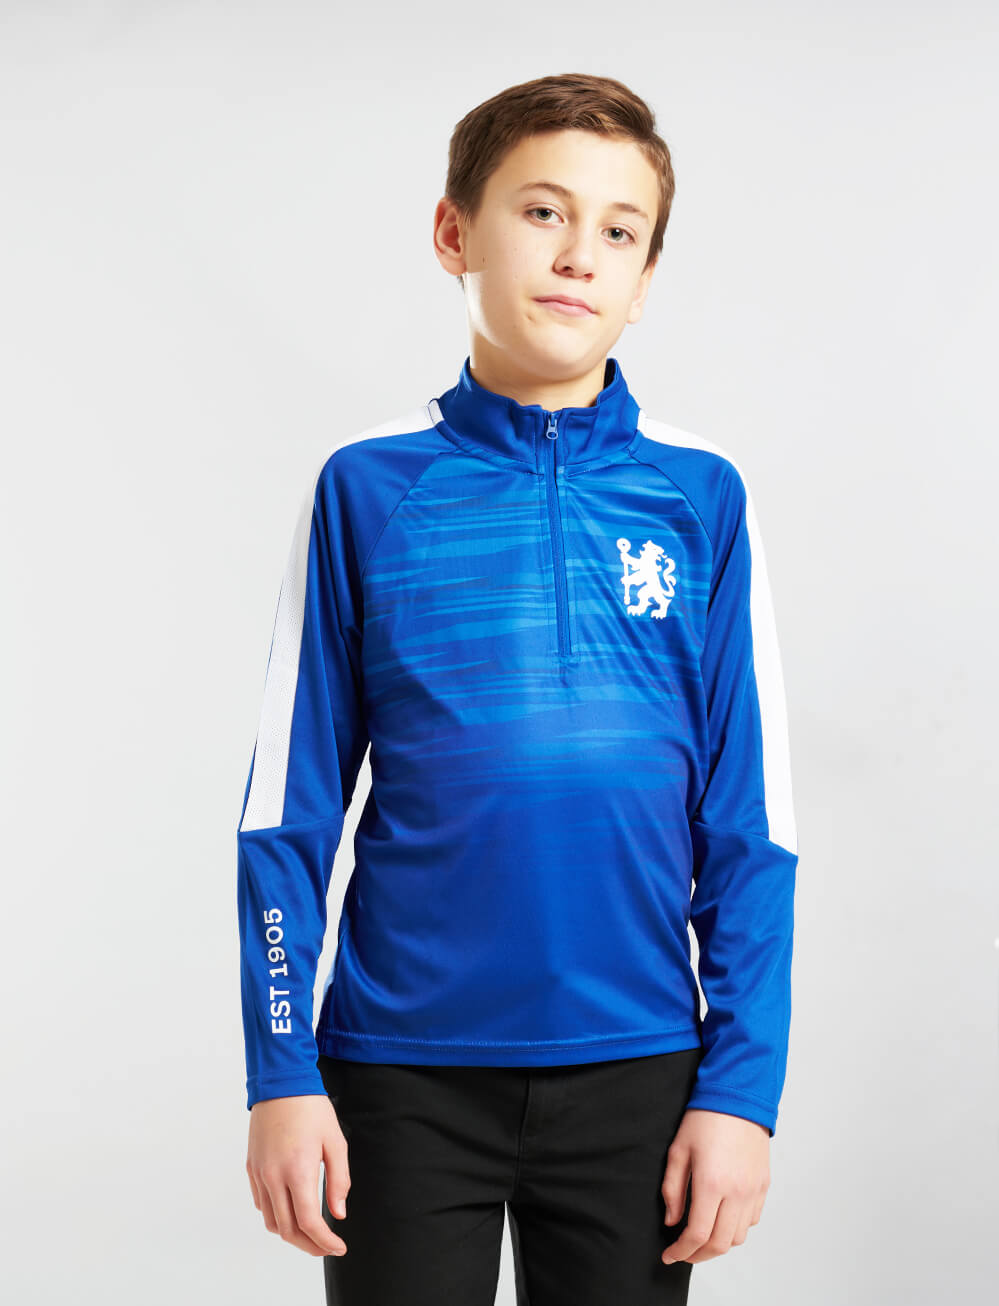 Official Chelsea Kids 1/4 Zip Track Top - Royal Blue - The World Football Store